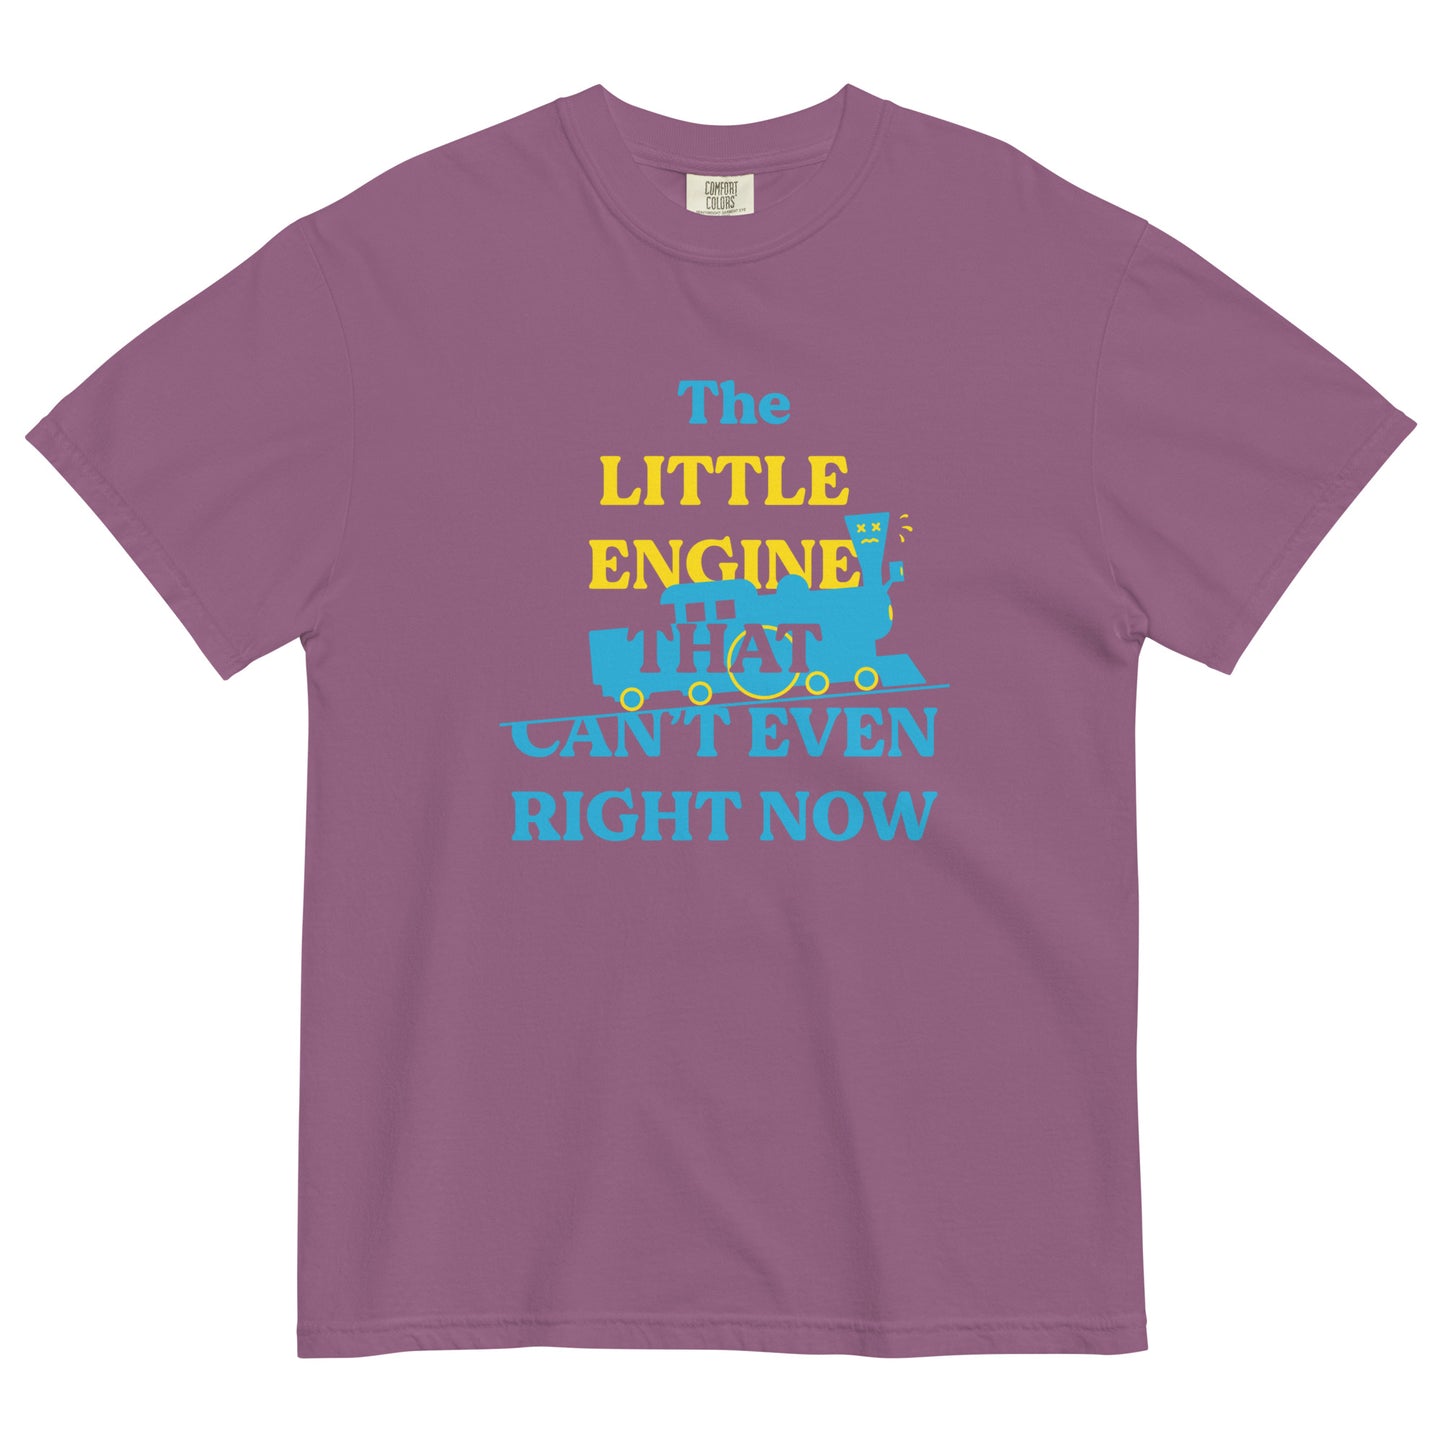 The Little Engine That Can't Even Right Now Men's Relaxed Fit Tee